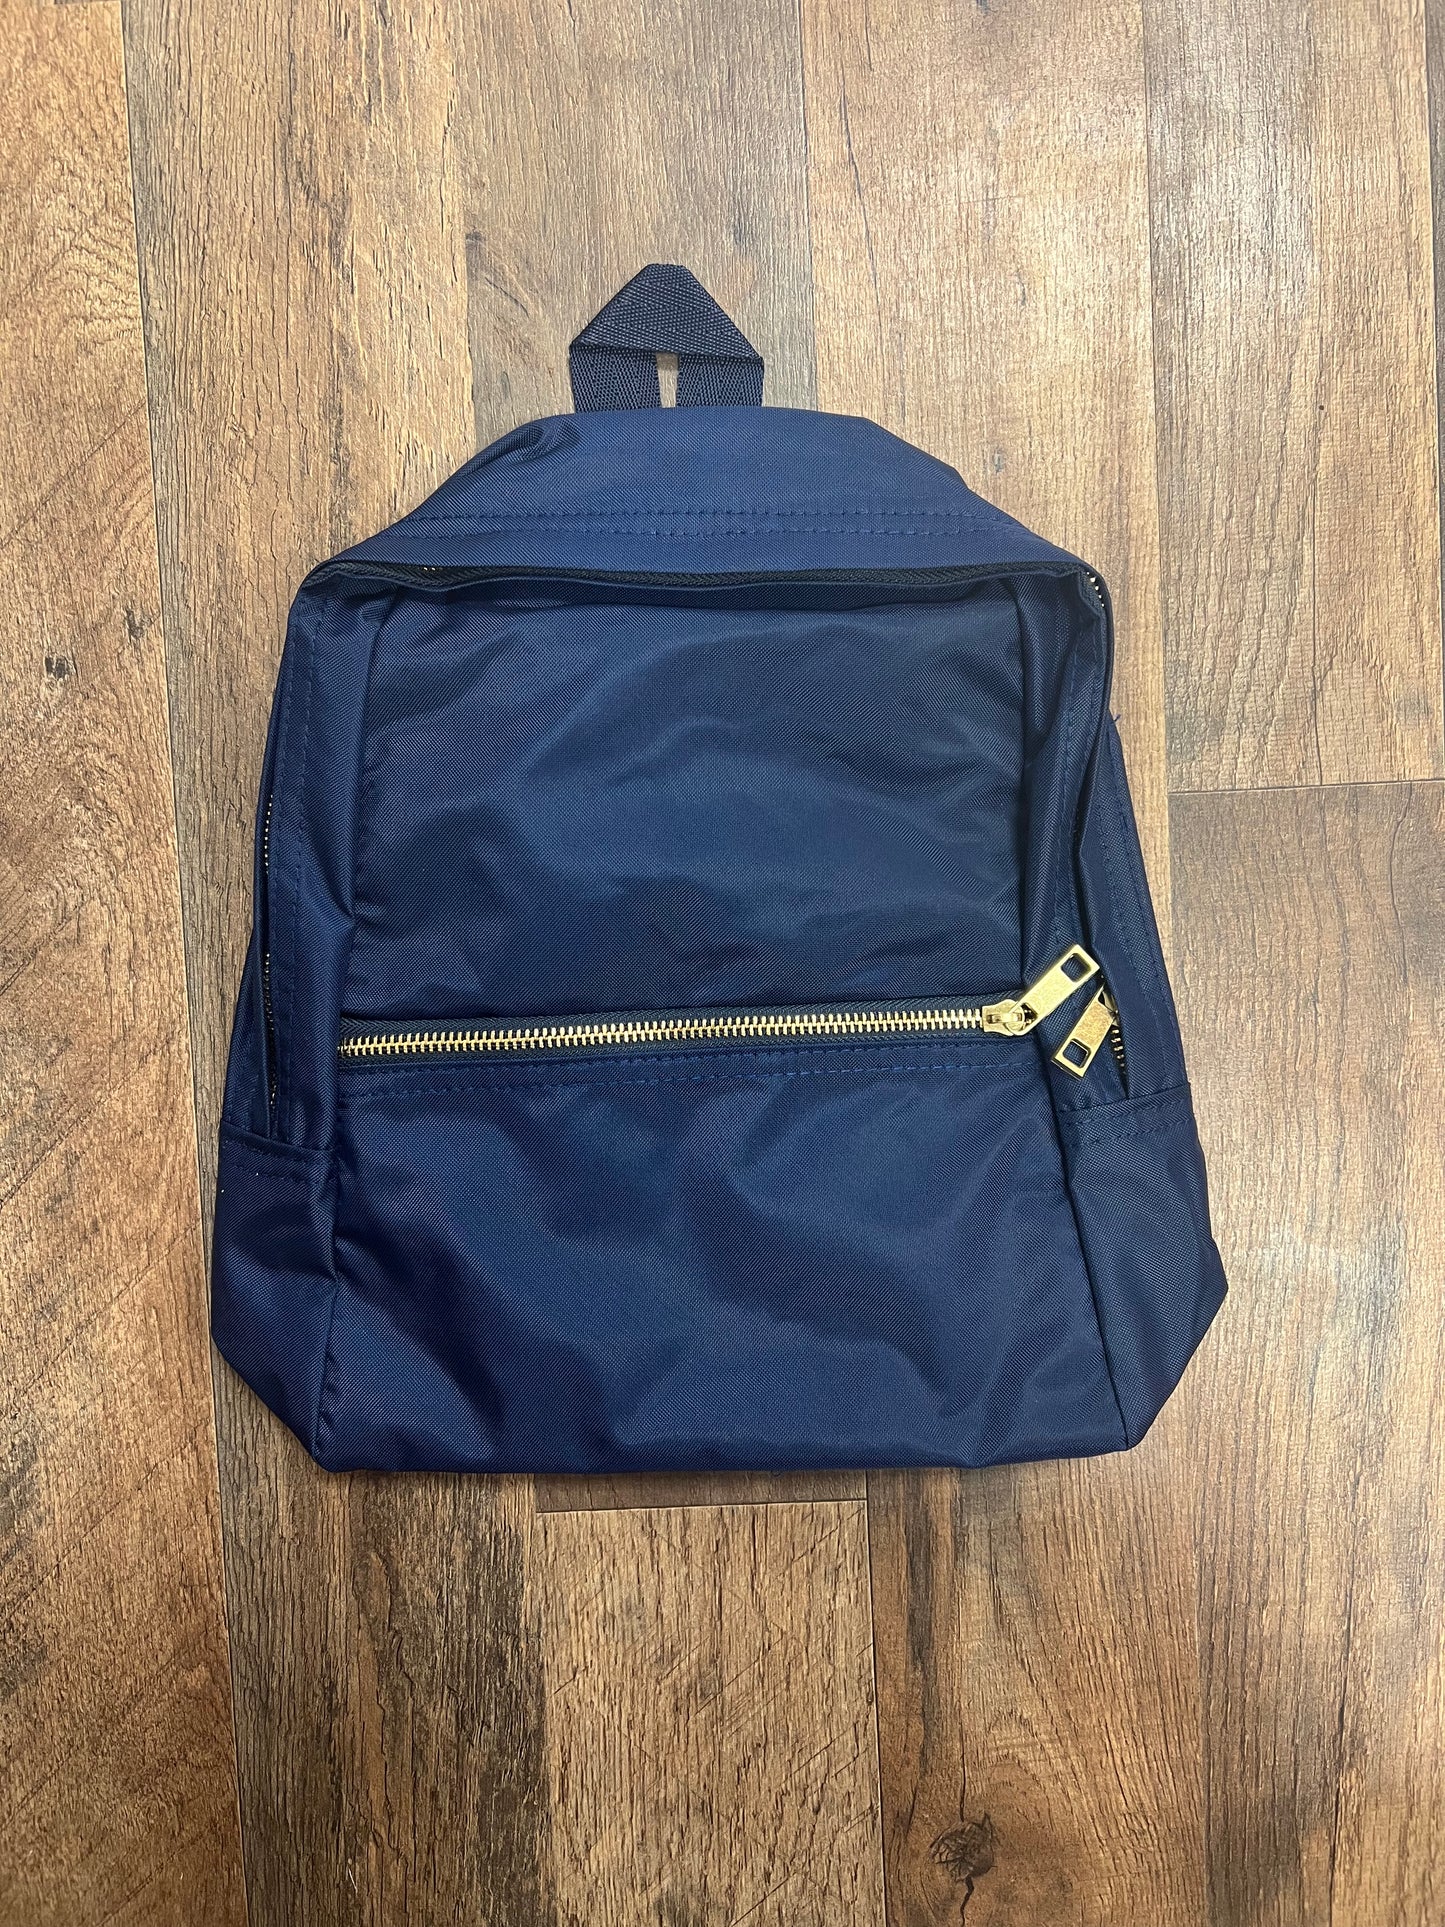 Small Solid navy mint backpack